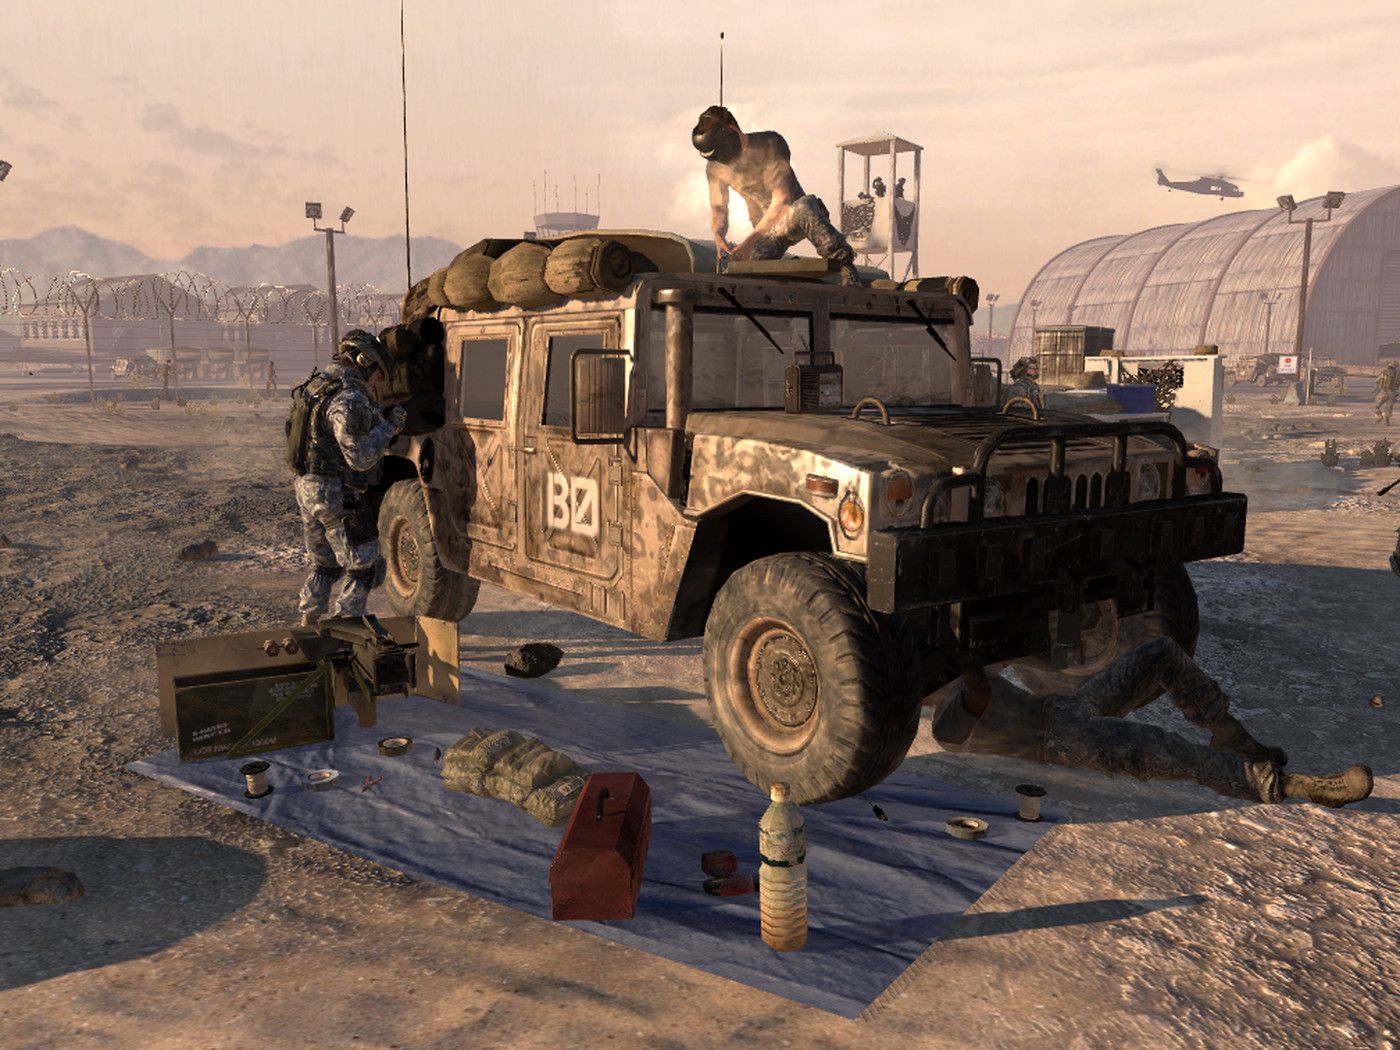 Call of Duty may use Humvees without maker's permission, judge rules